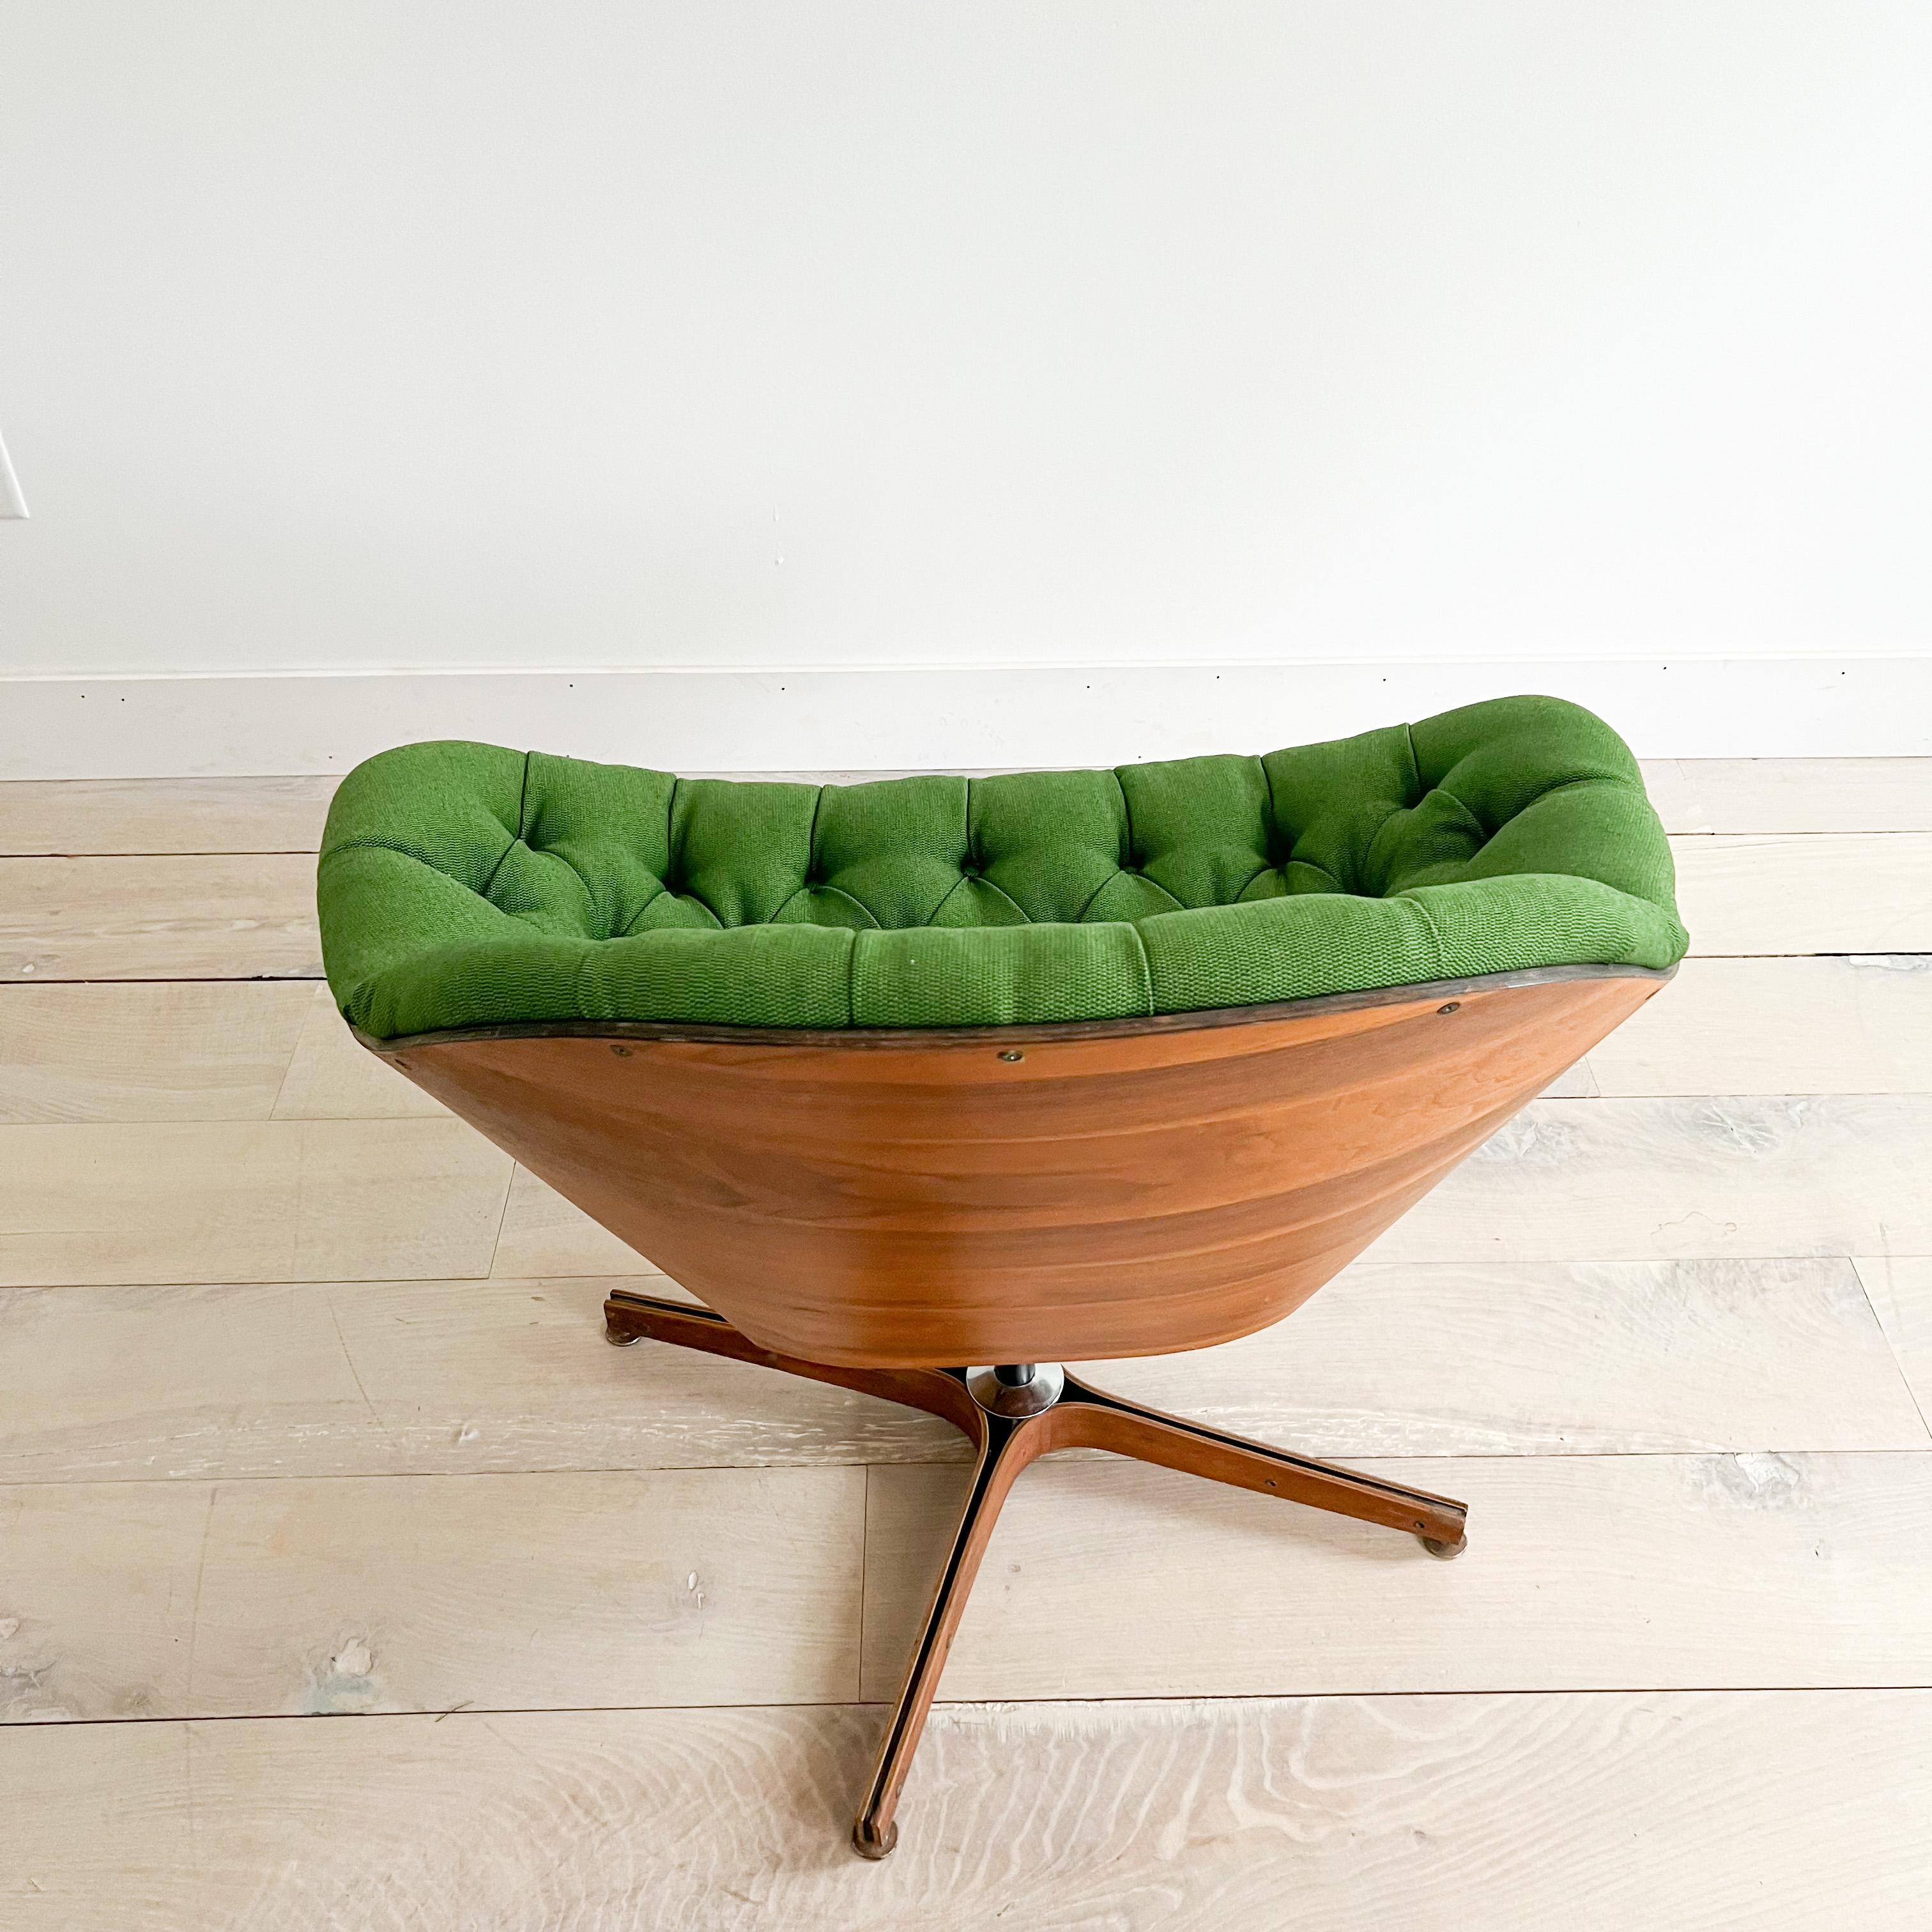 Mid-20th Century Rare Mid-Century Modern “Mr. Chair” by Plycraft, New Green Upholstery